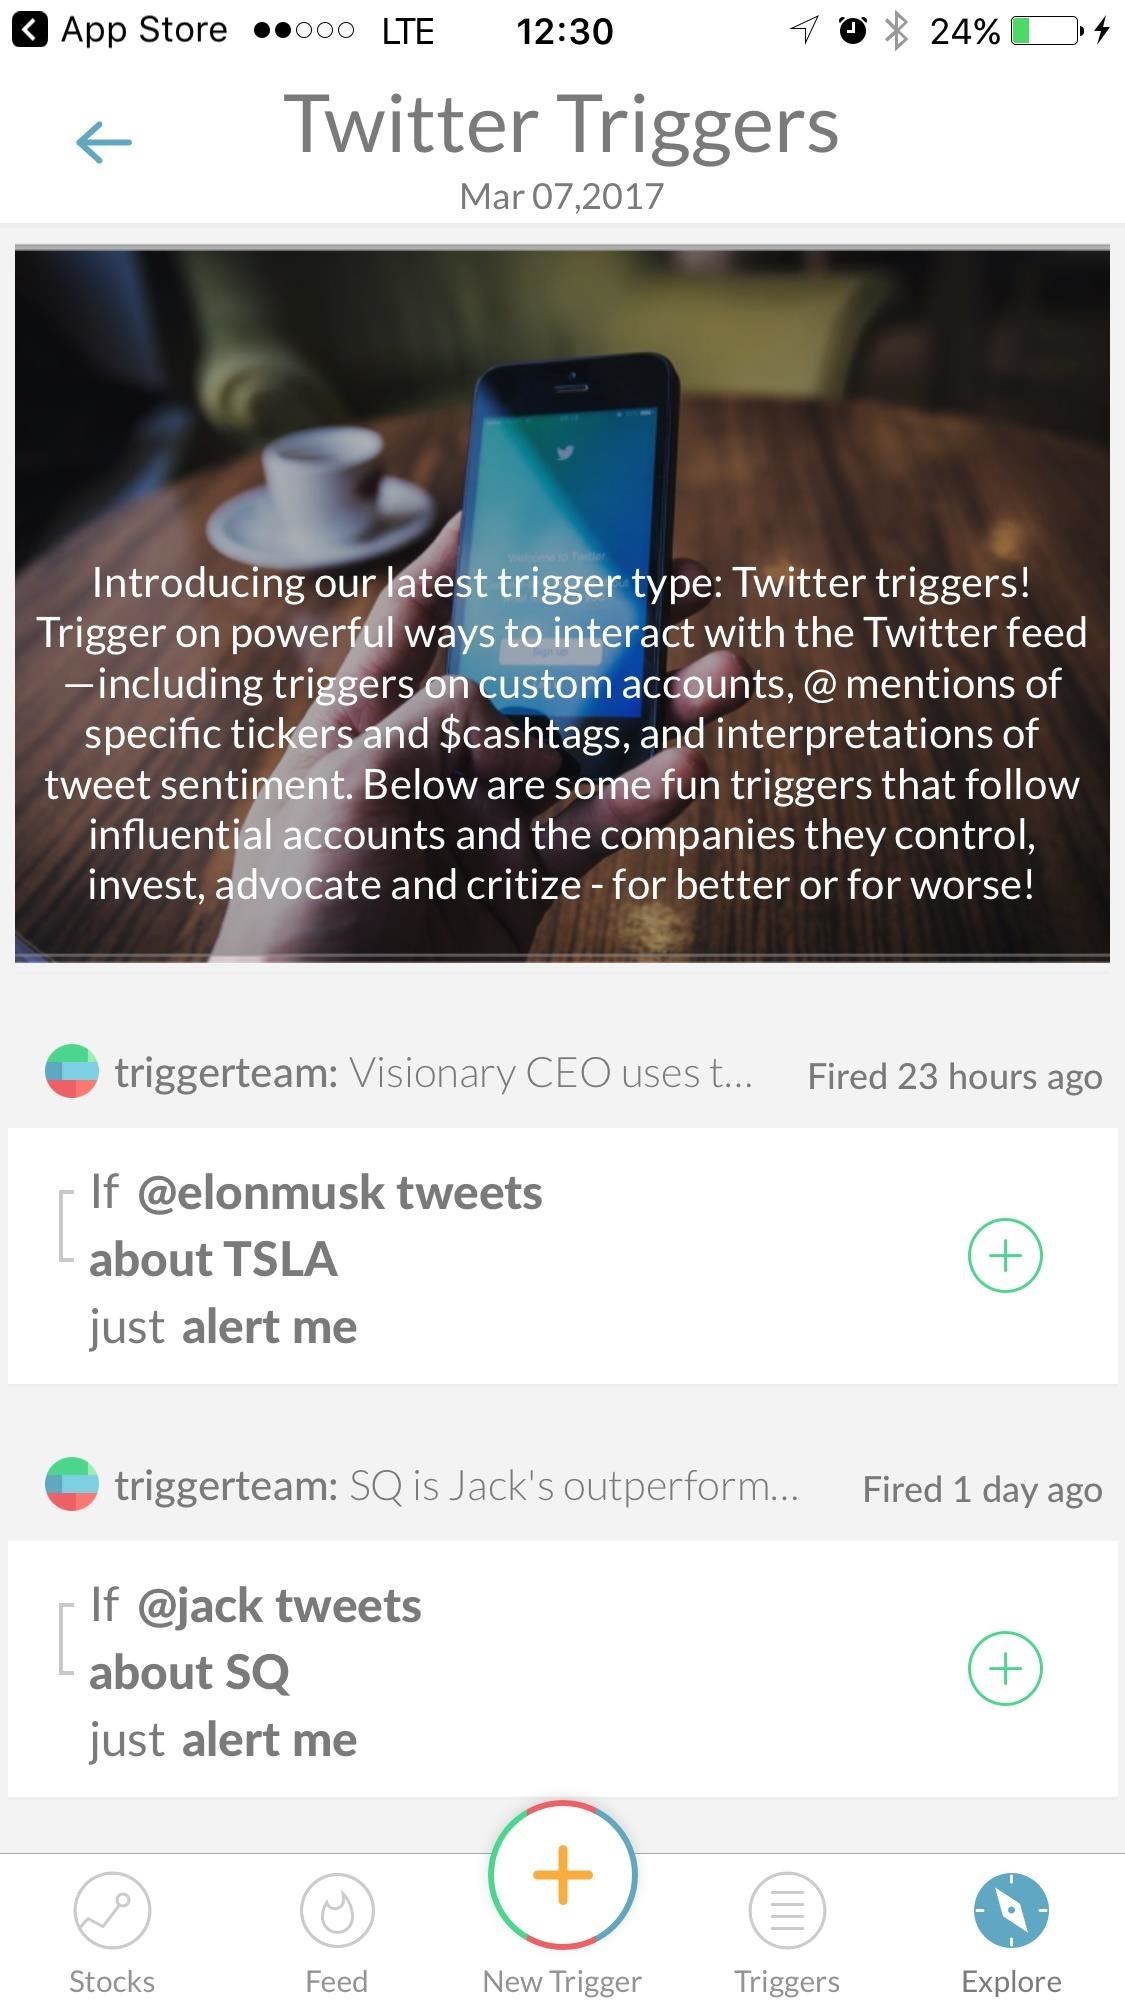 This App Notifies You Every Time a Trump Tweet 'Triggers' Your Stocks